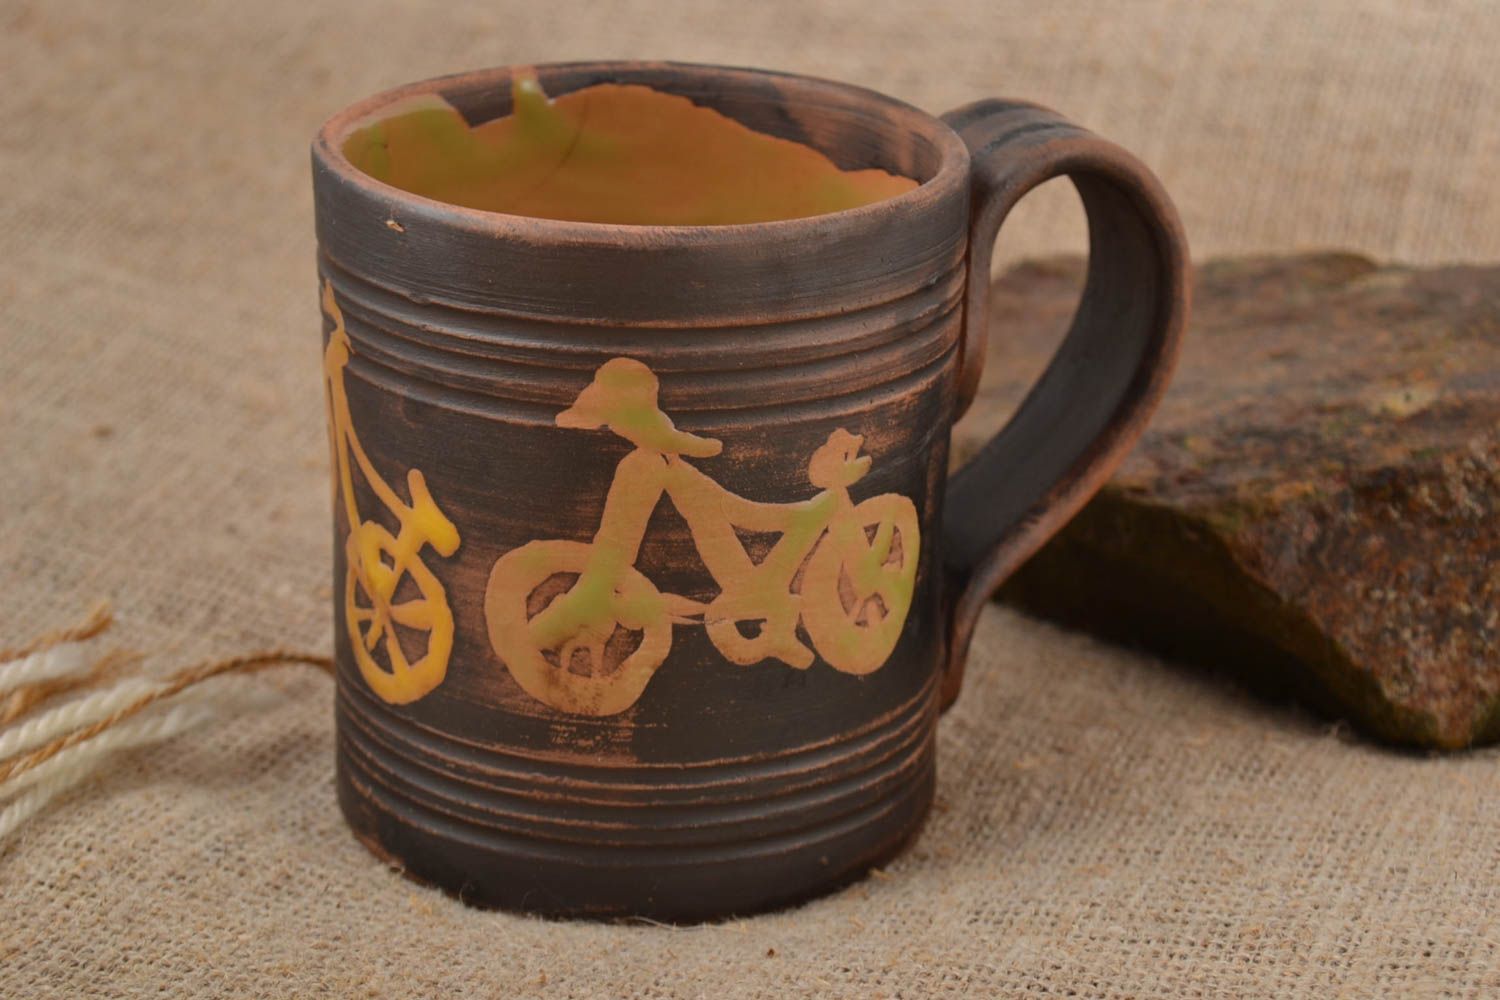 Handmade ceramic 8 oz coffee mug in dark brown and beige color with handle and bicycle pattern photo 1